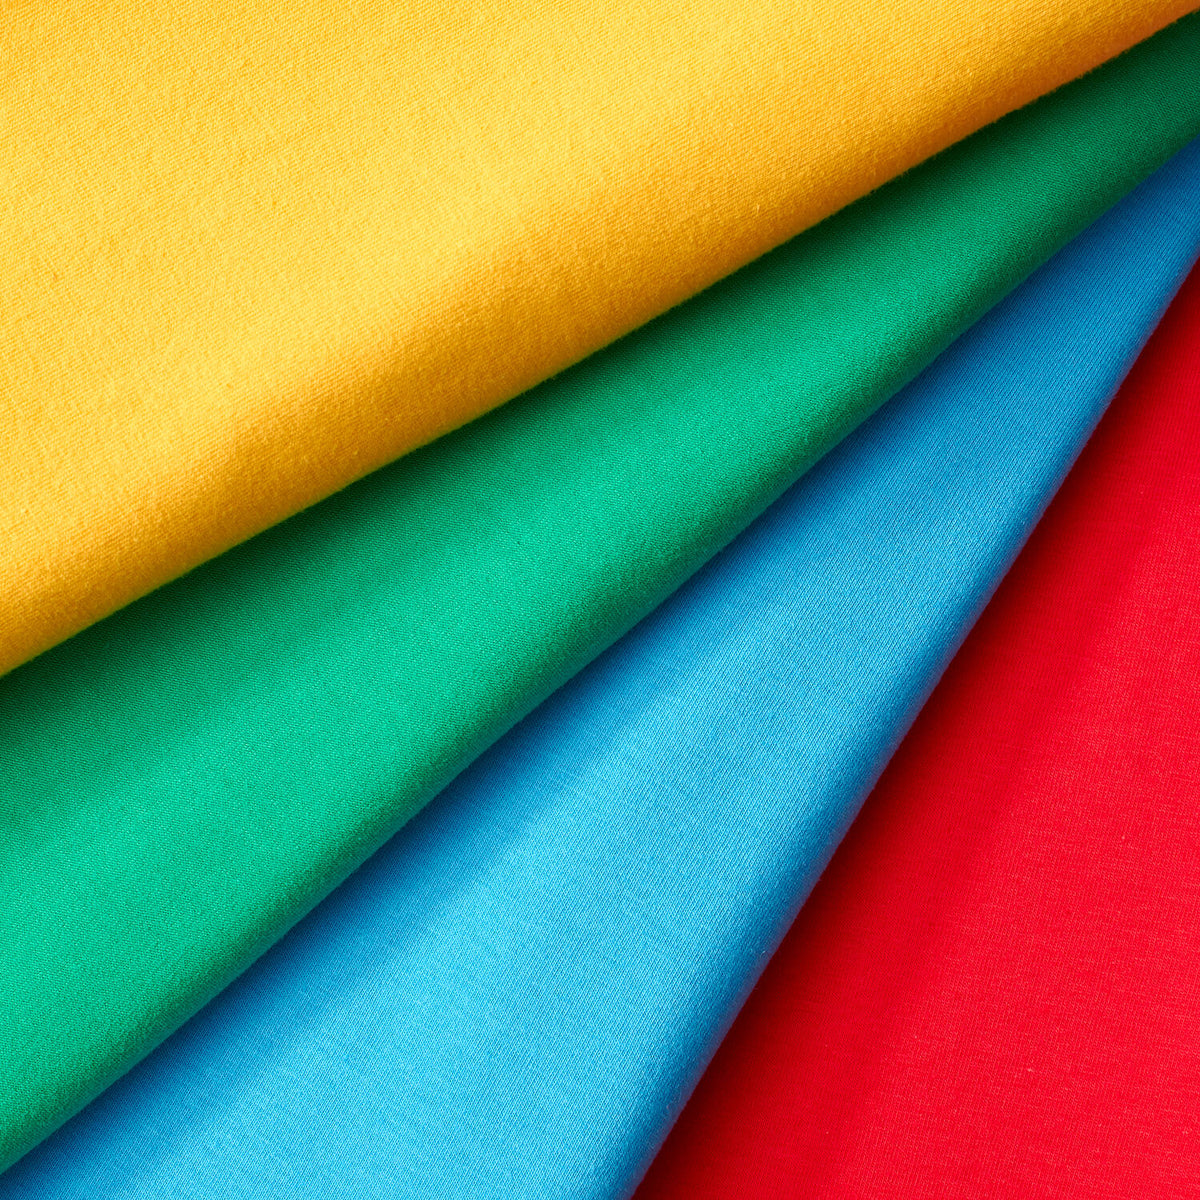 95 Cotton 5 Spandex Knitted Fabric, Plain/Solids, Multicolour at